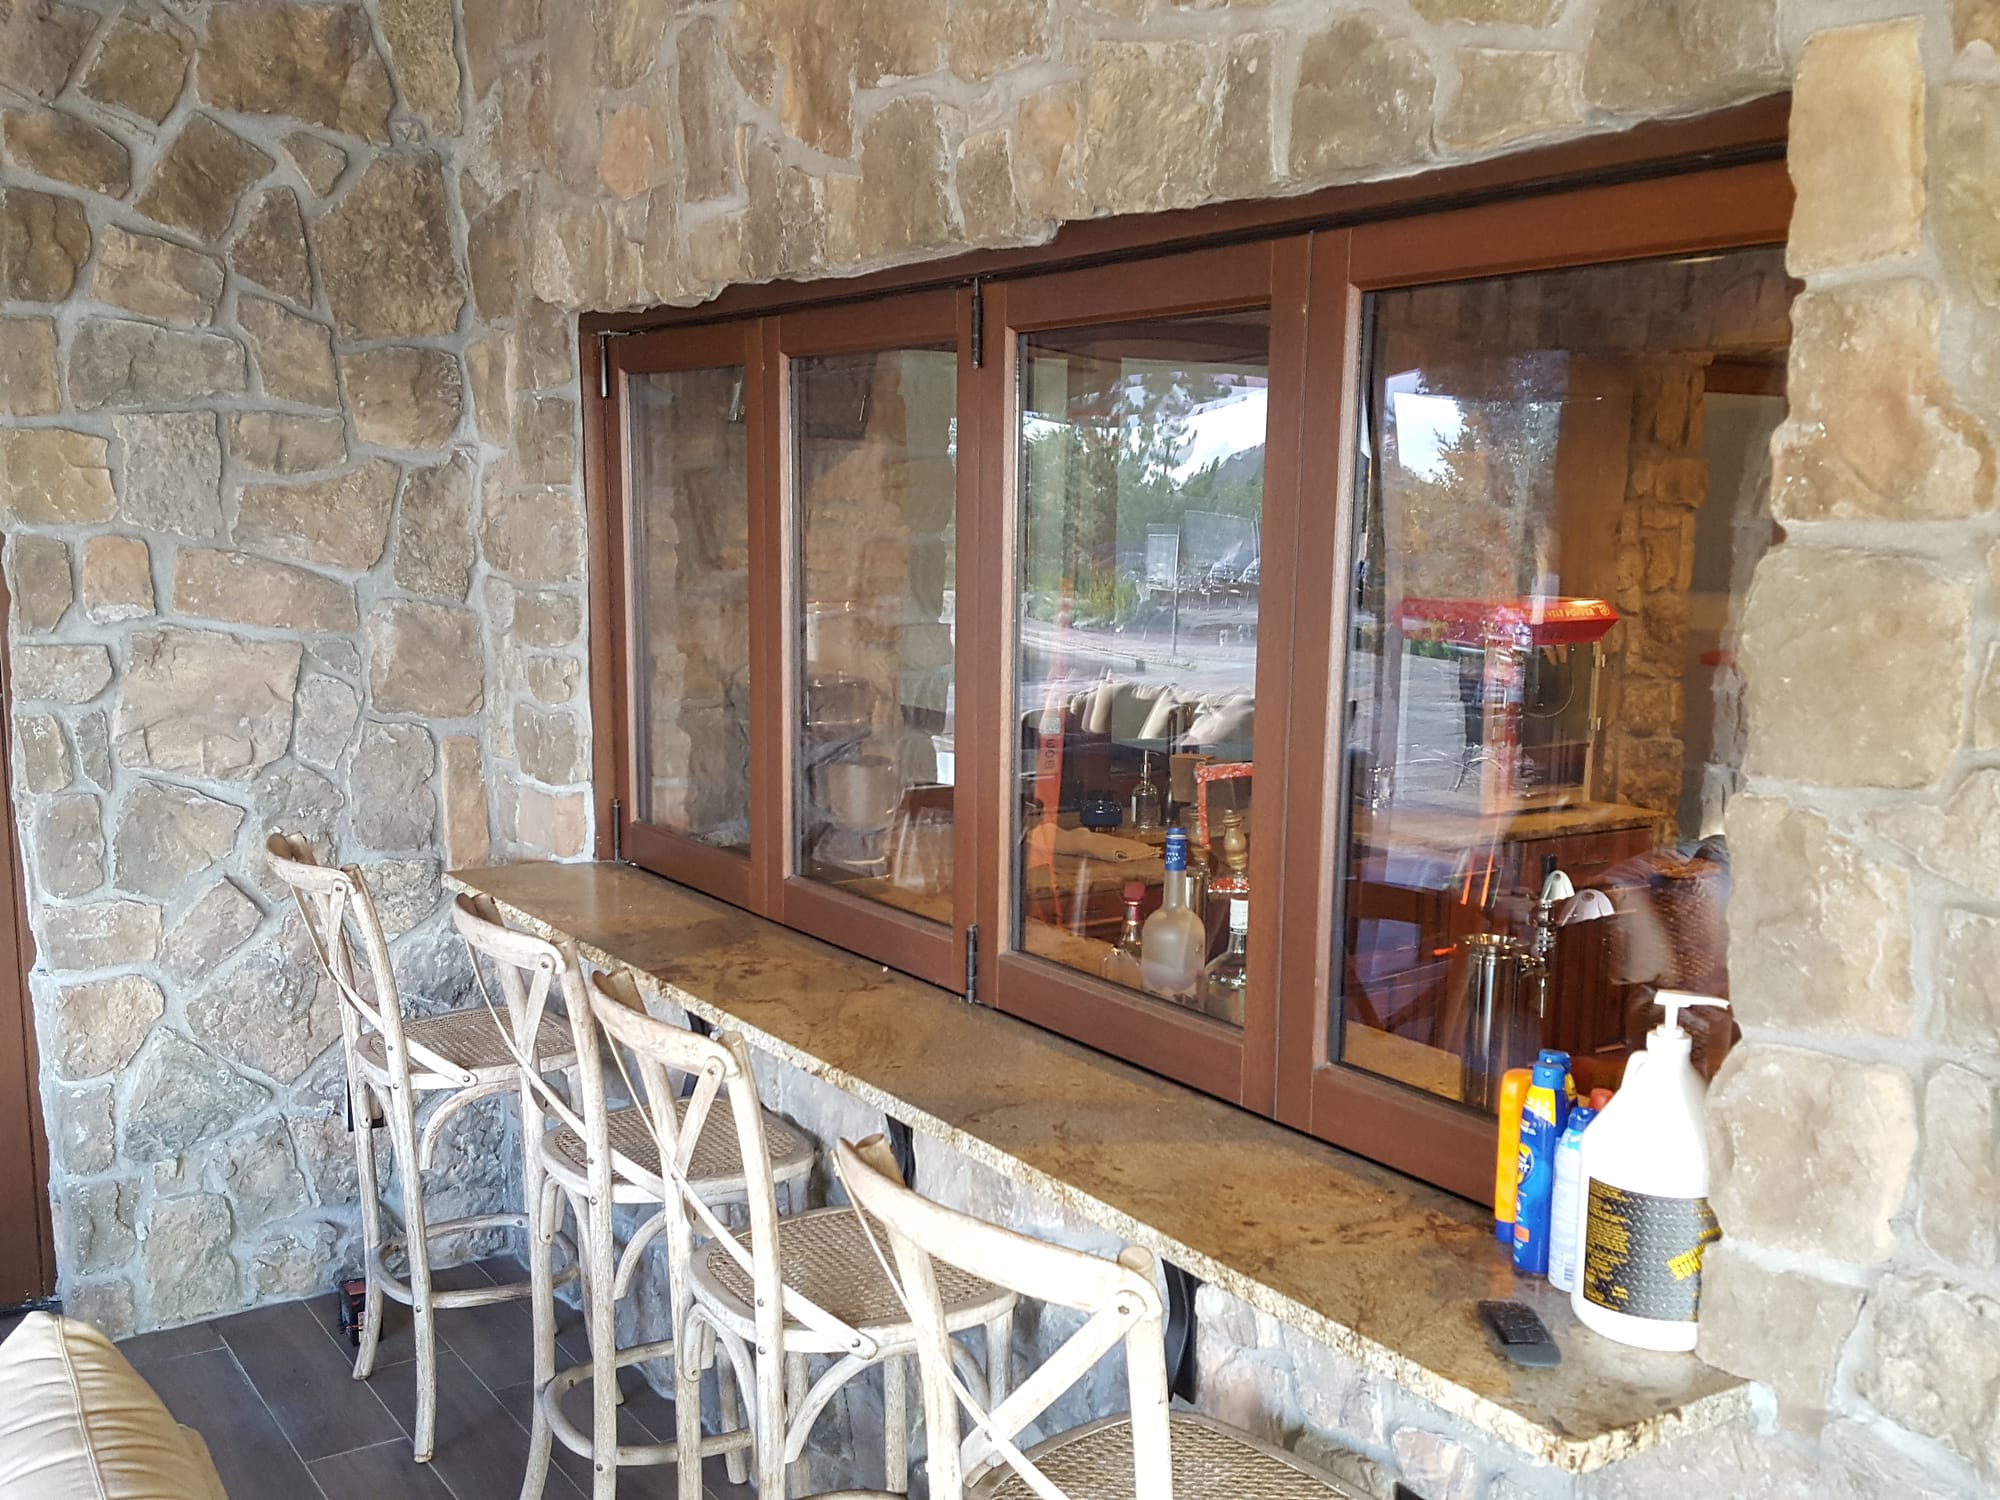 The patio bar features a four panel wood folding window